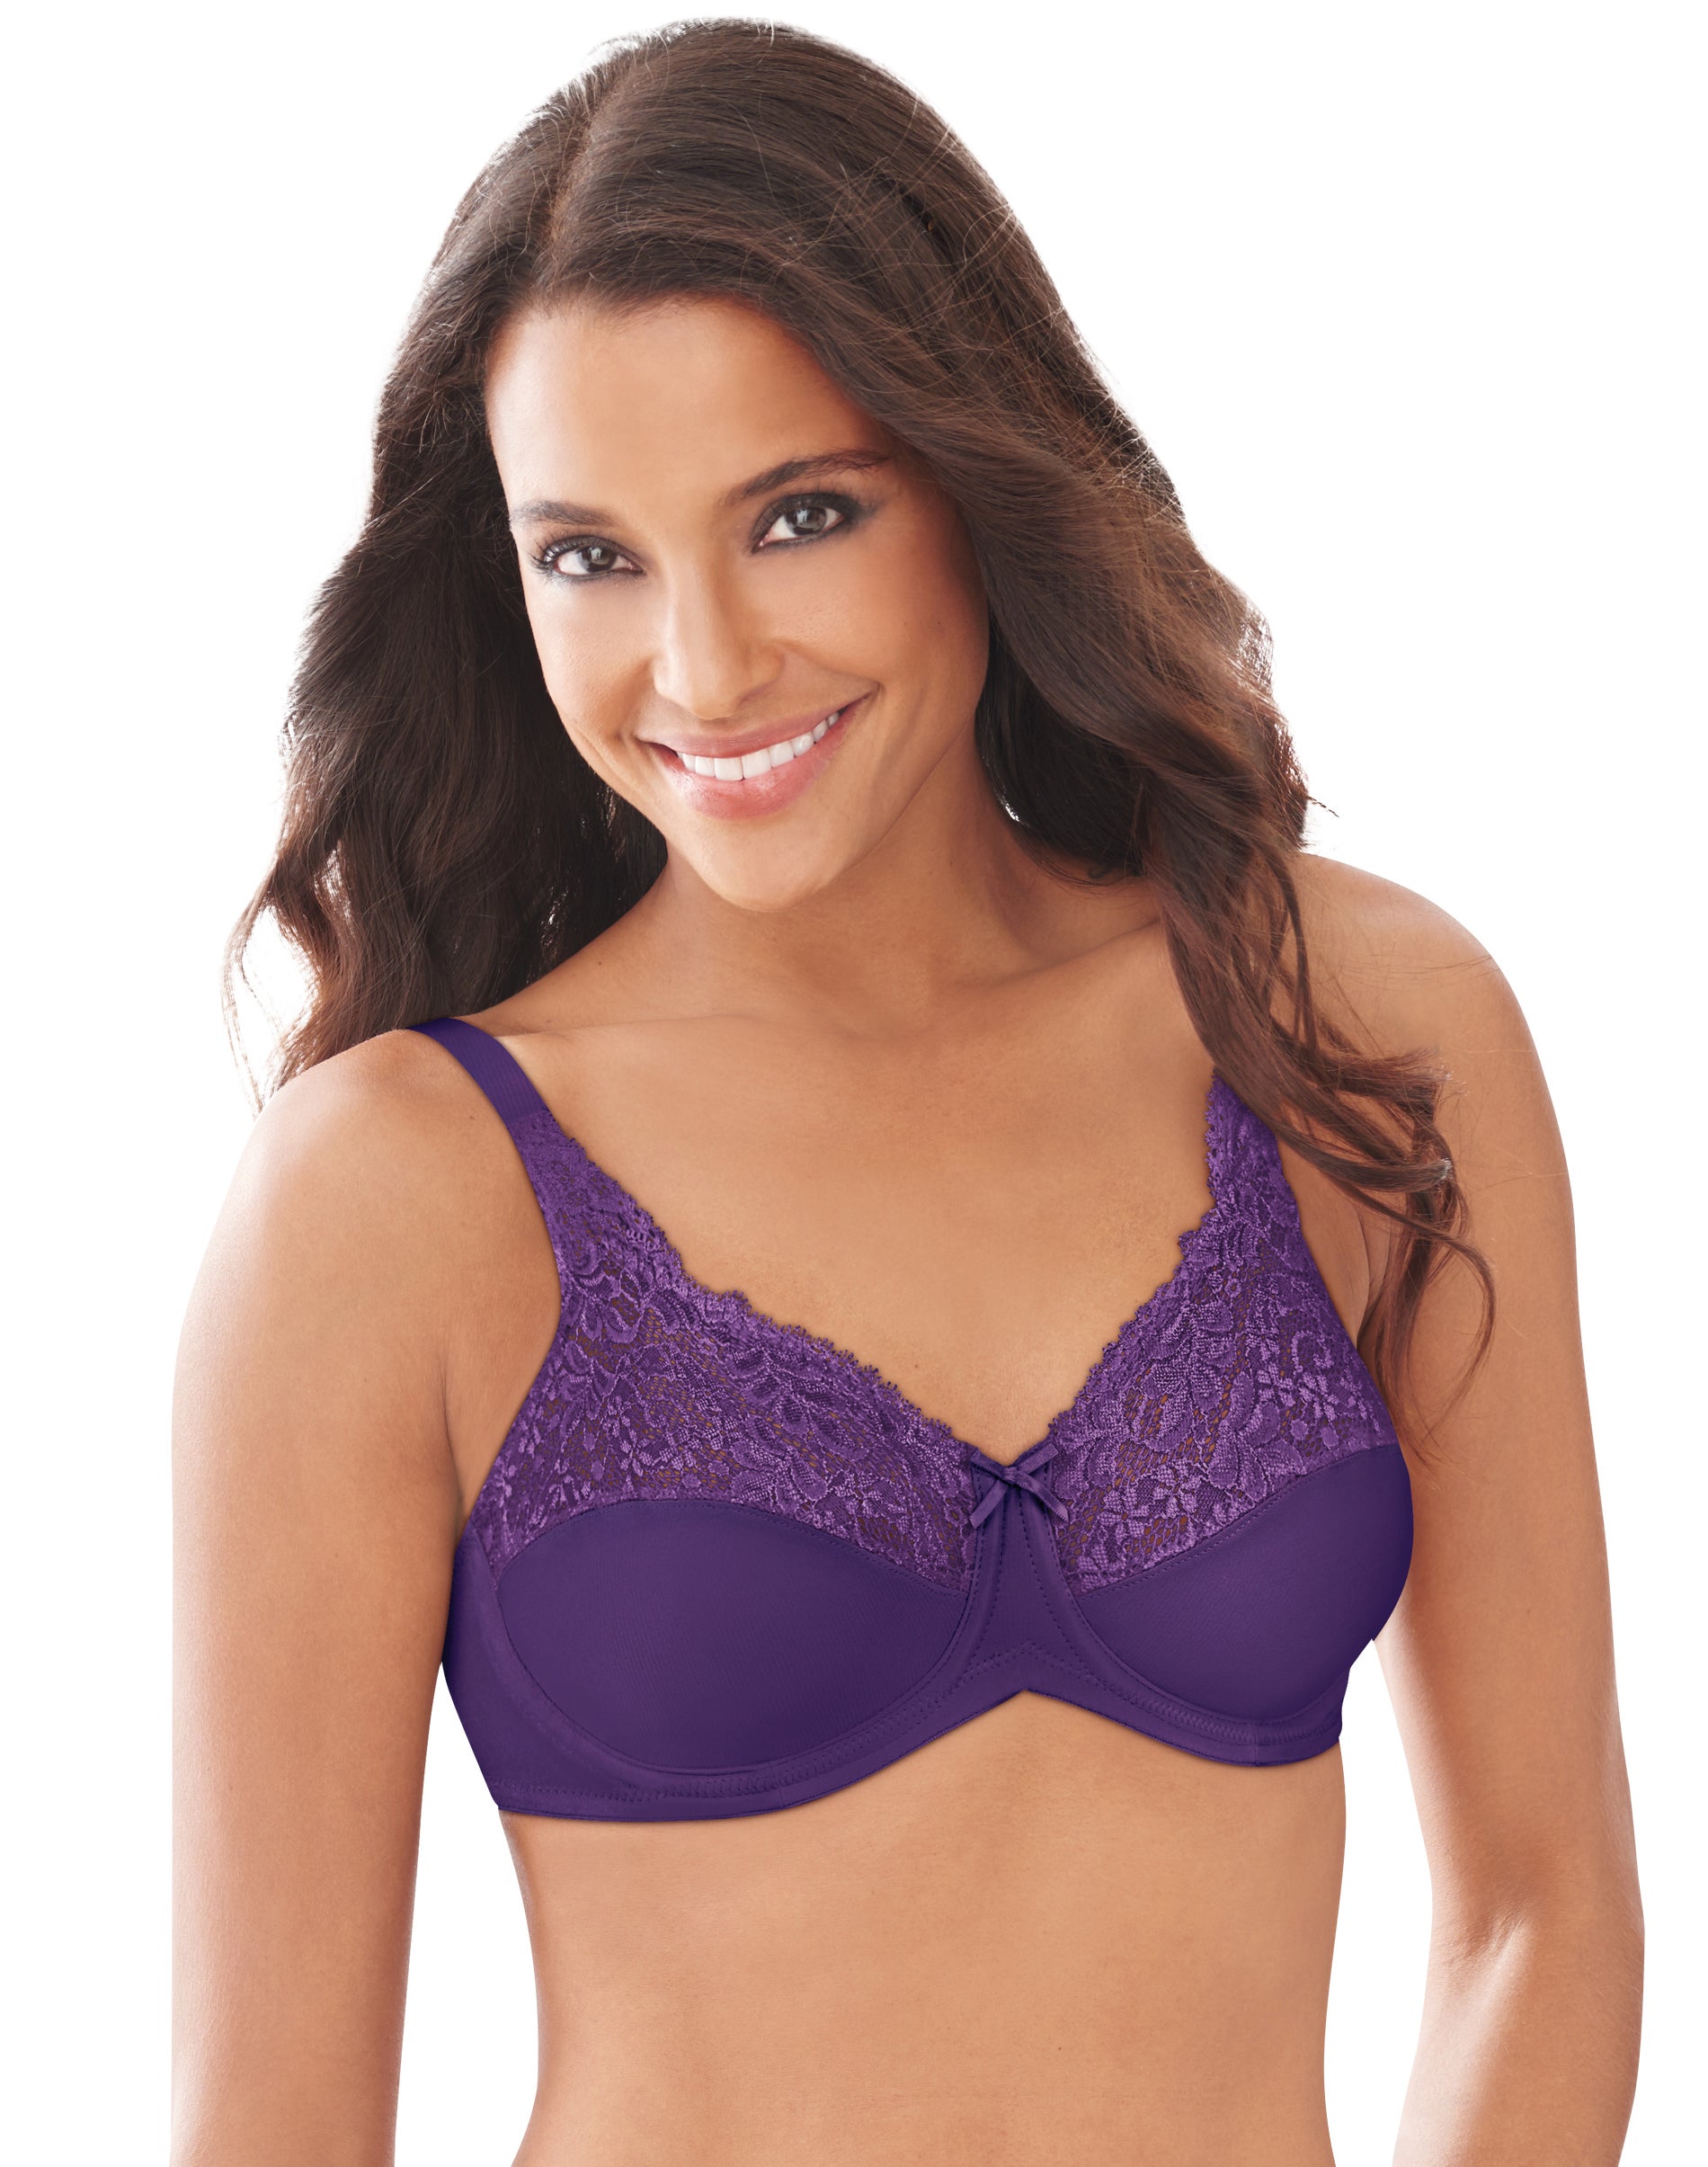 Lilyette By Bali Minimizer Underwire Bra Womens Full Coverage Seamless LY0428 - image 1 of 2